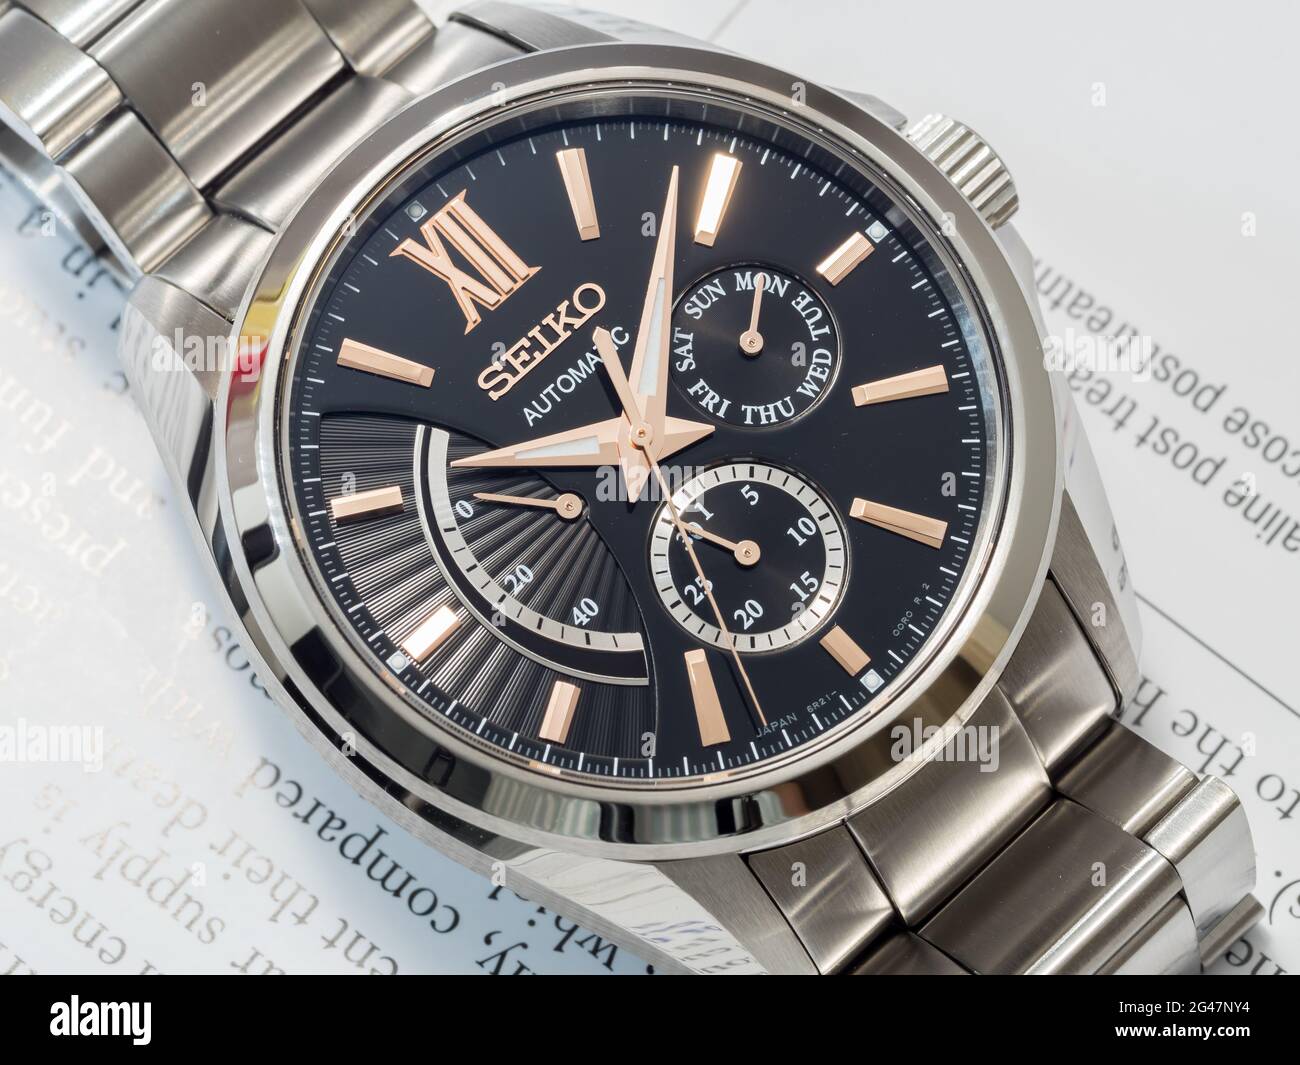 BANGKOK DECEMBER Seiko Automatic Watch, Black Dial With Subdial Day, Date  And Power Reserve Indicator On English Paper, Selective Focus On Its B  Stock Photo Alamy 